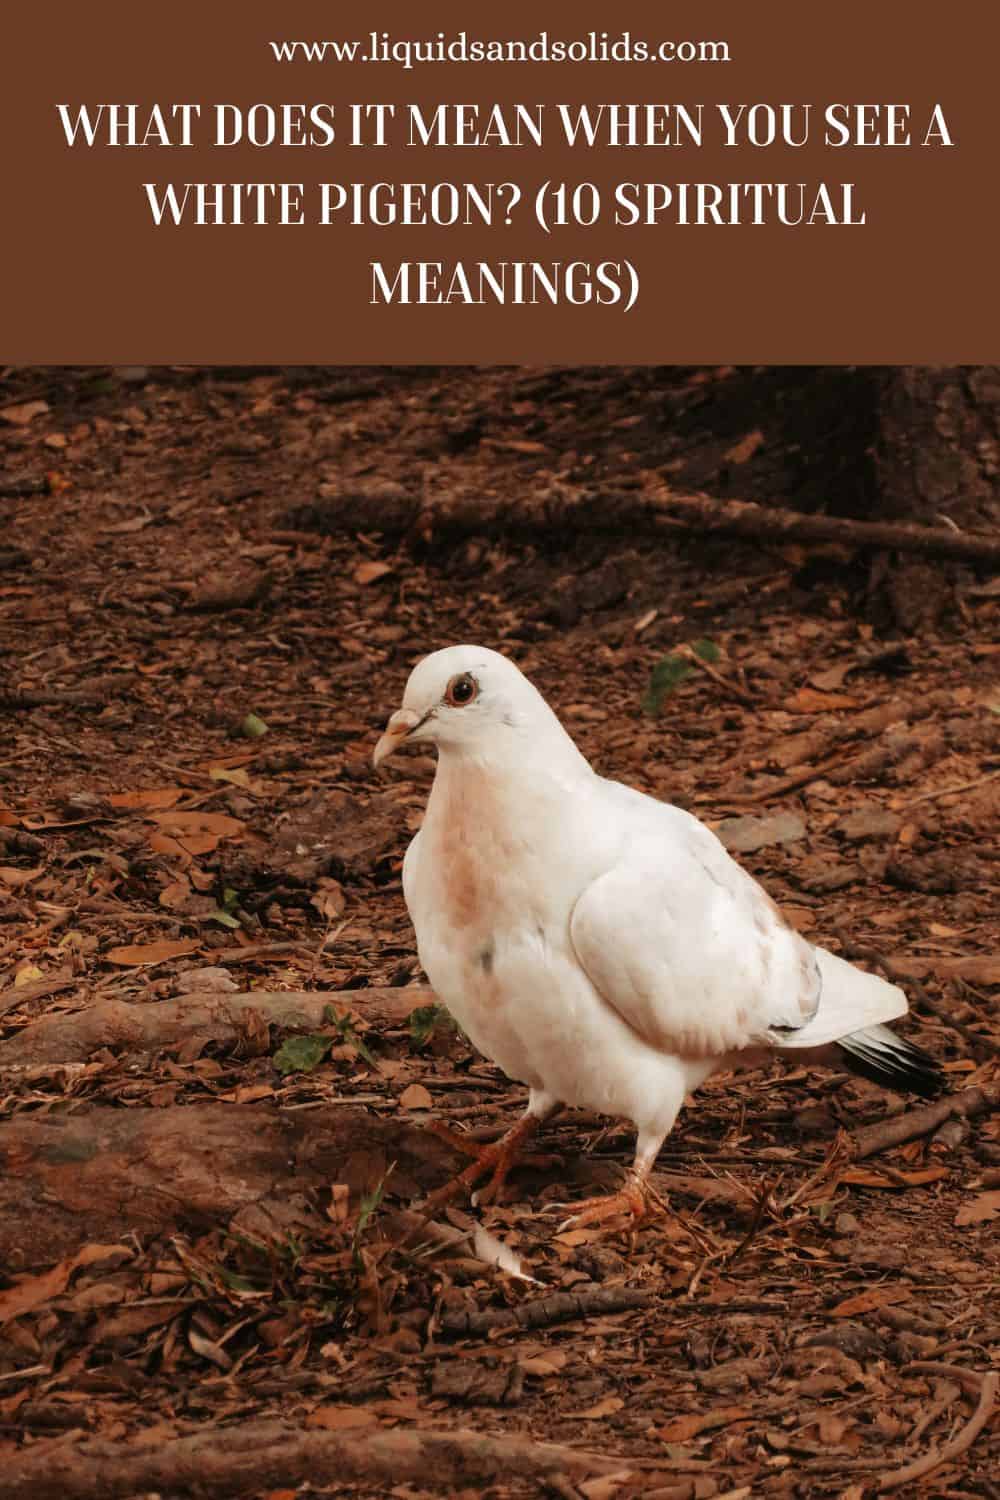 What Does It Mean When You See A White Pigeon? (10 Spiritual Meanings)